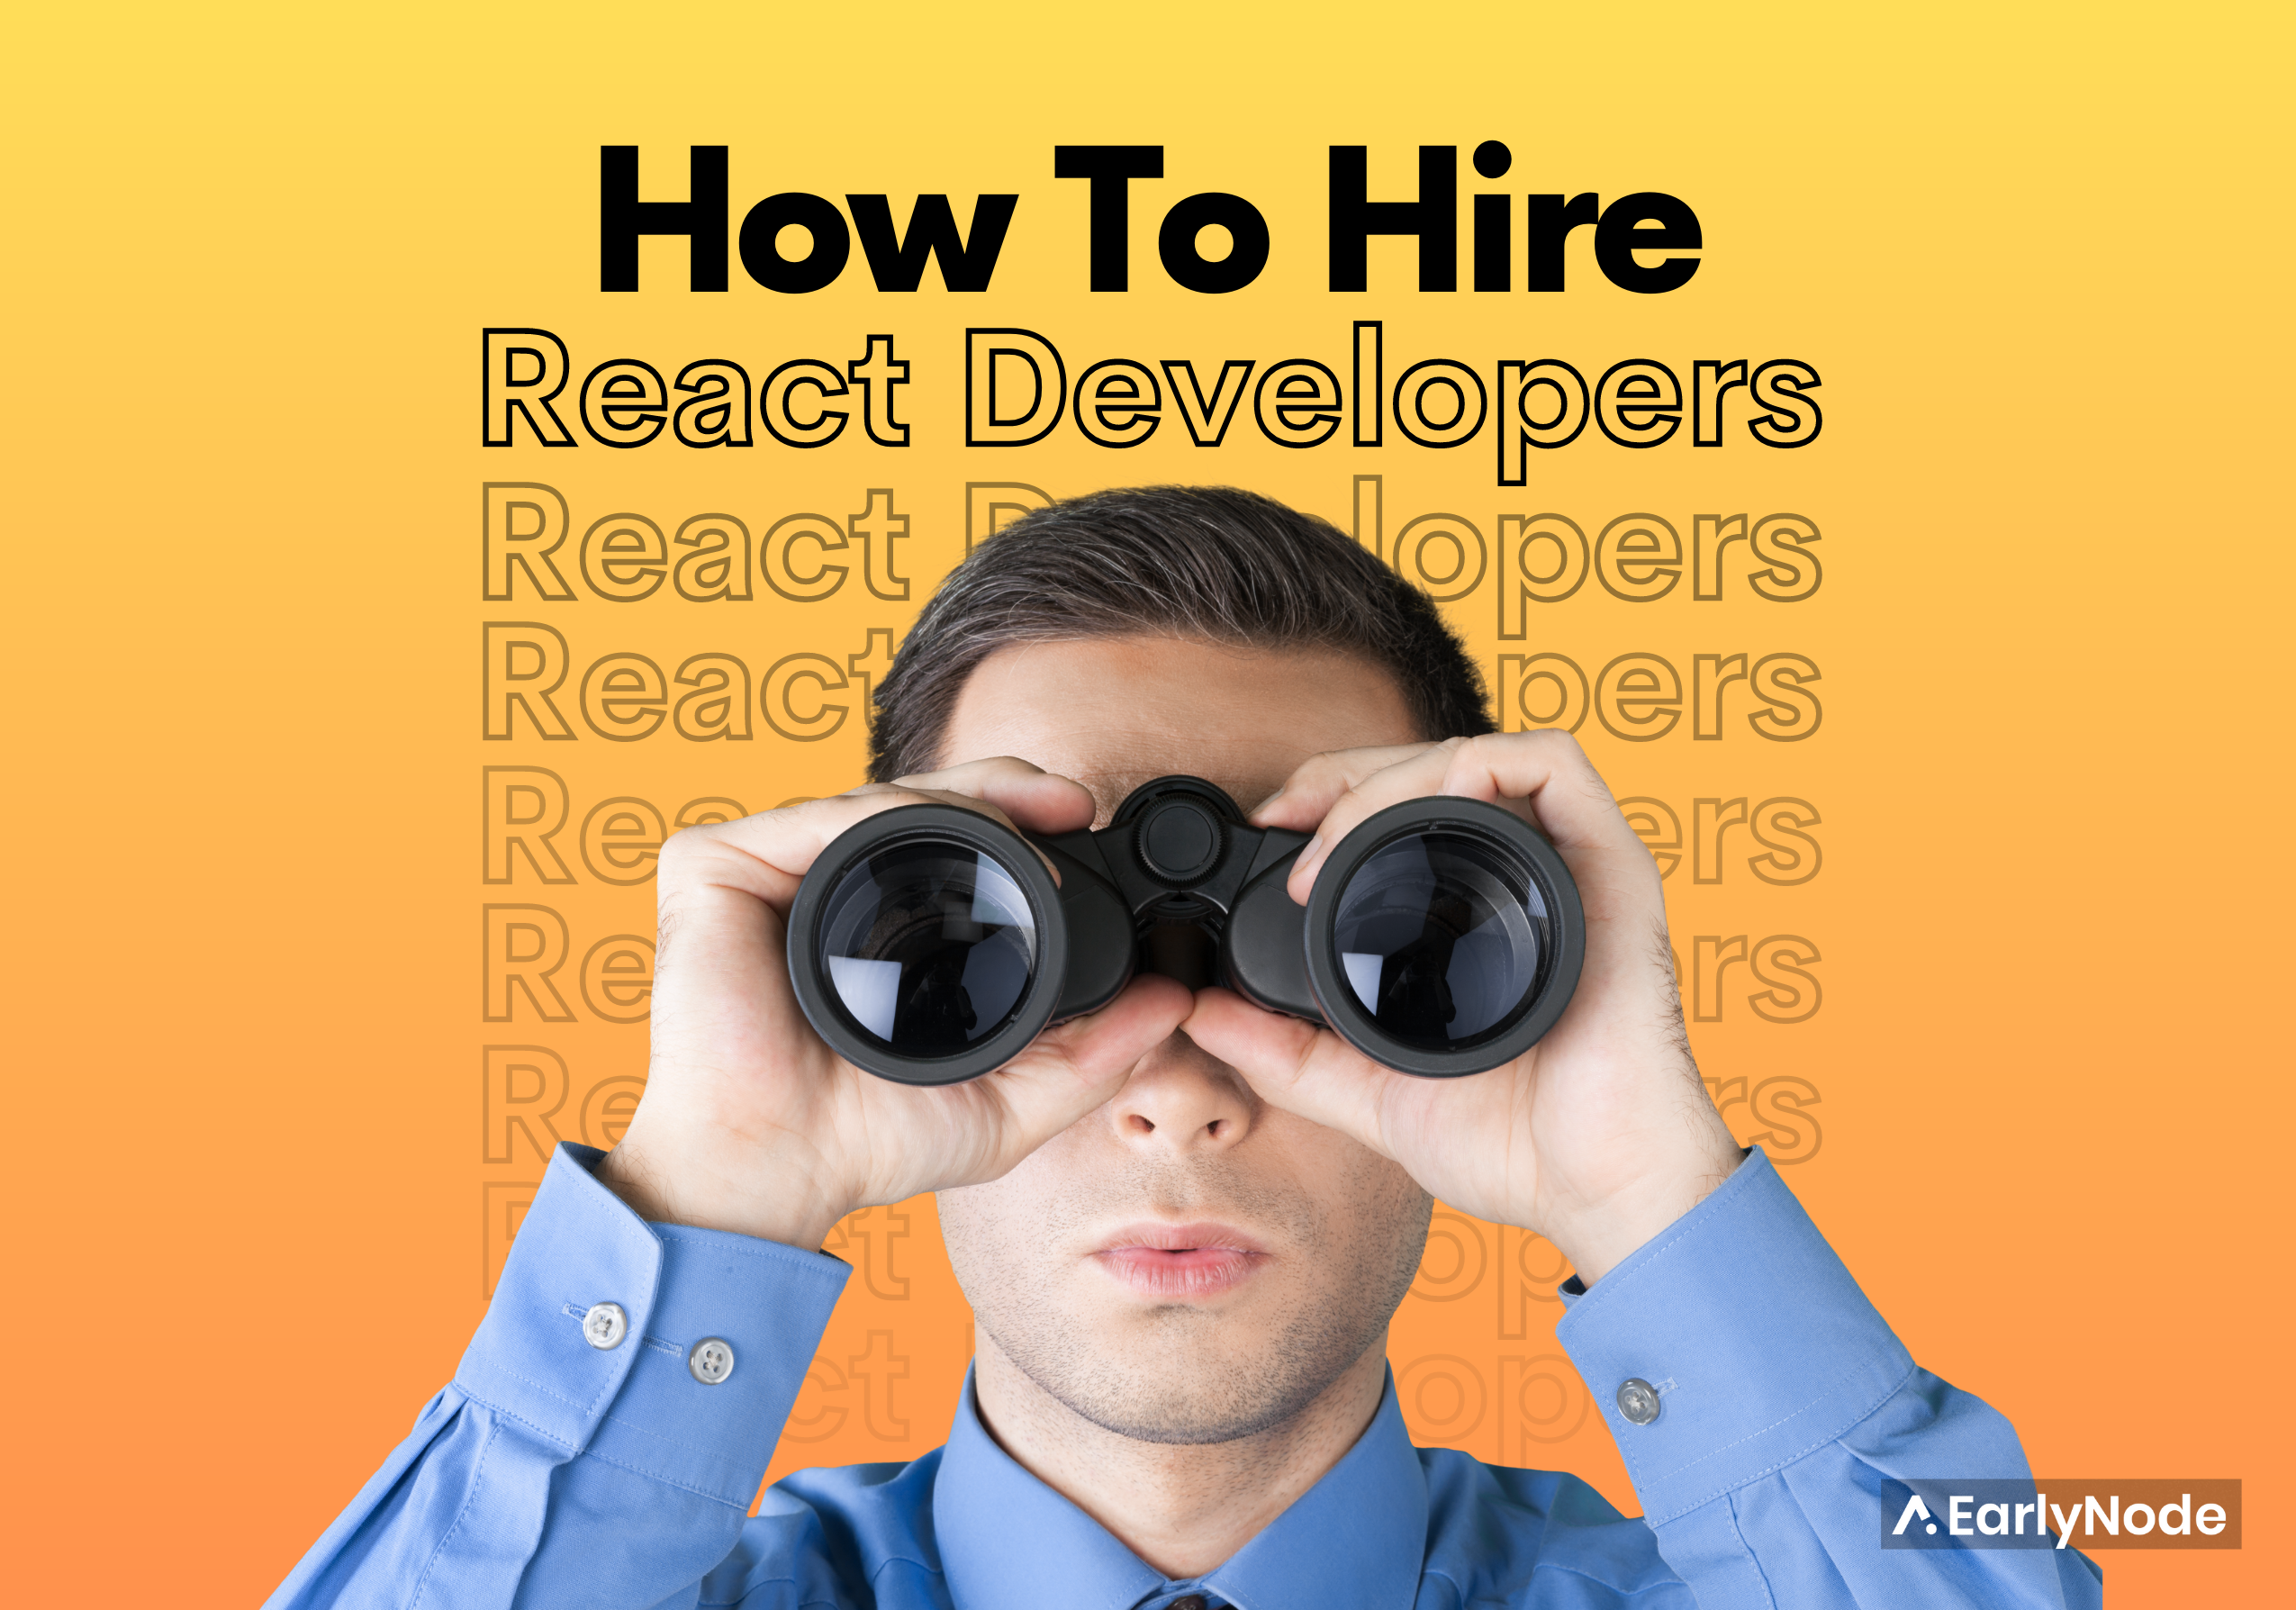 How To Hire a React Developer Through an Outstaffing Agency